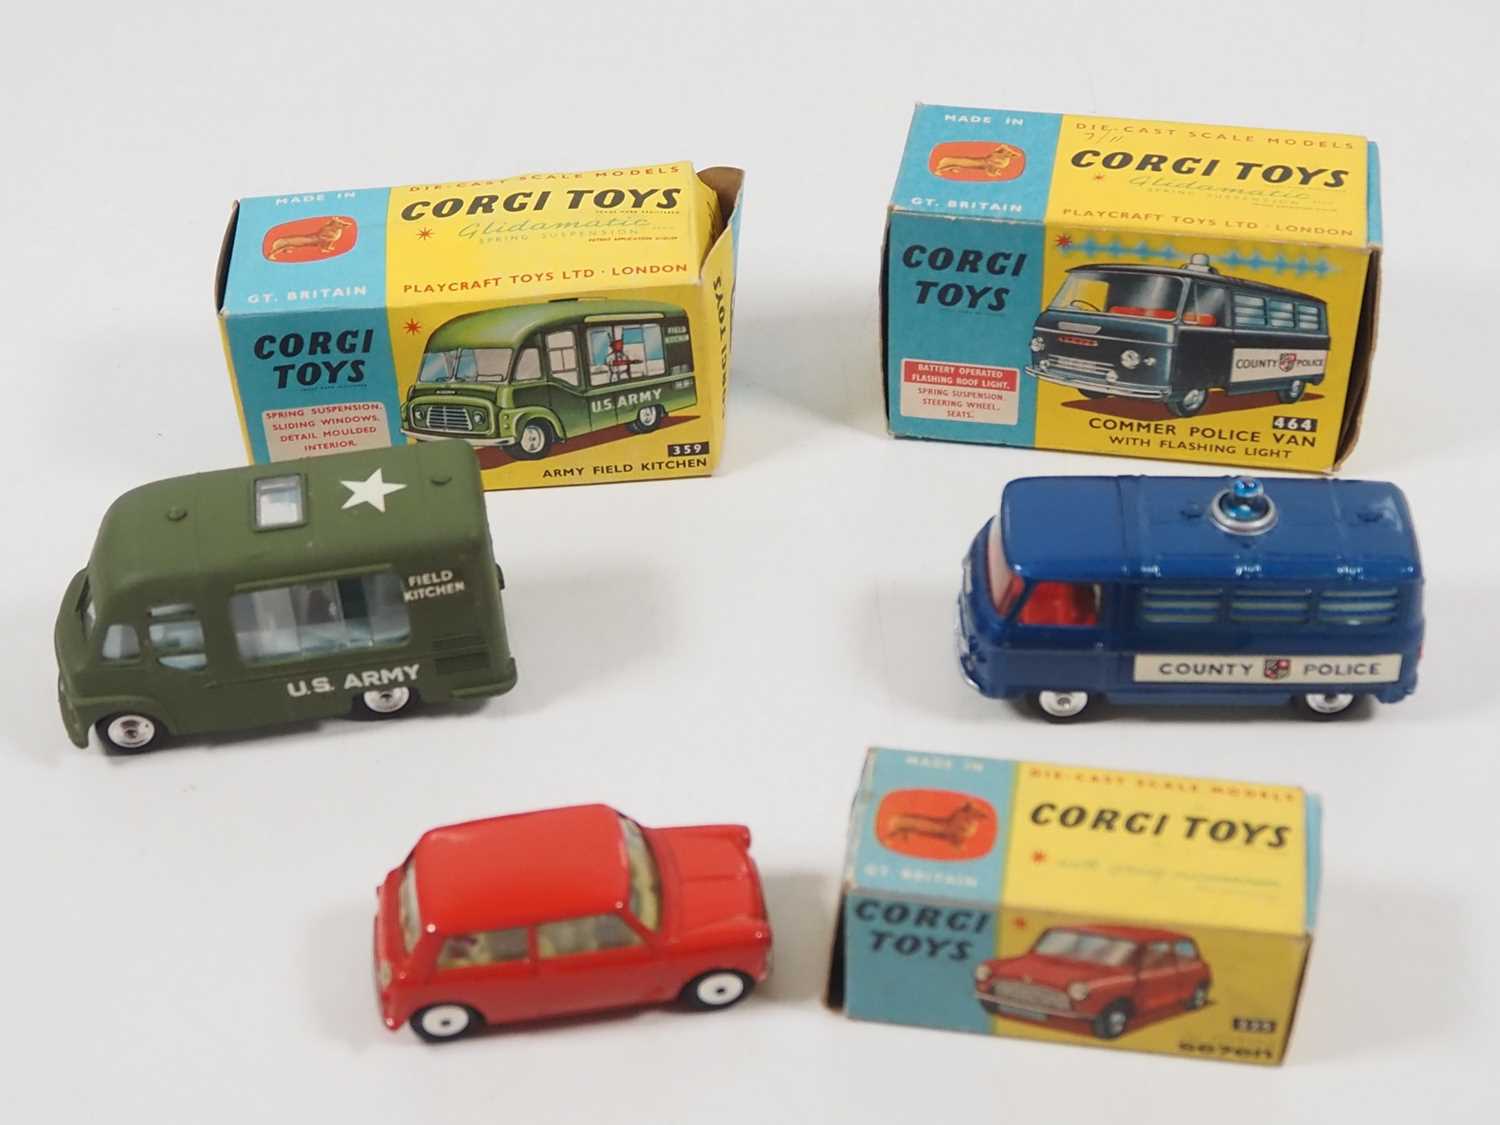 A group of CORGI diecast vehicles comprising a 225 Austin Seven, a 359 Army Field Kitchen and a